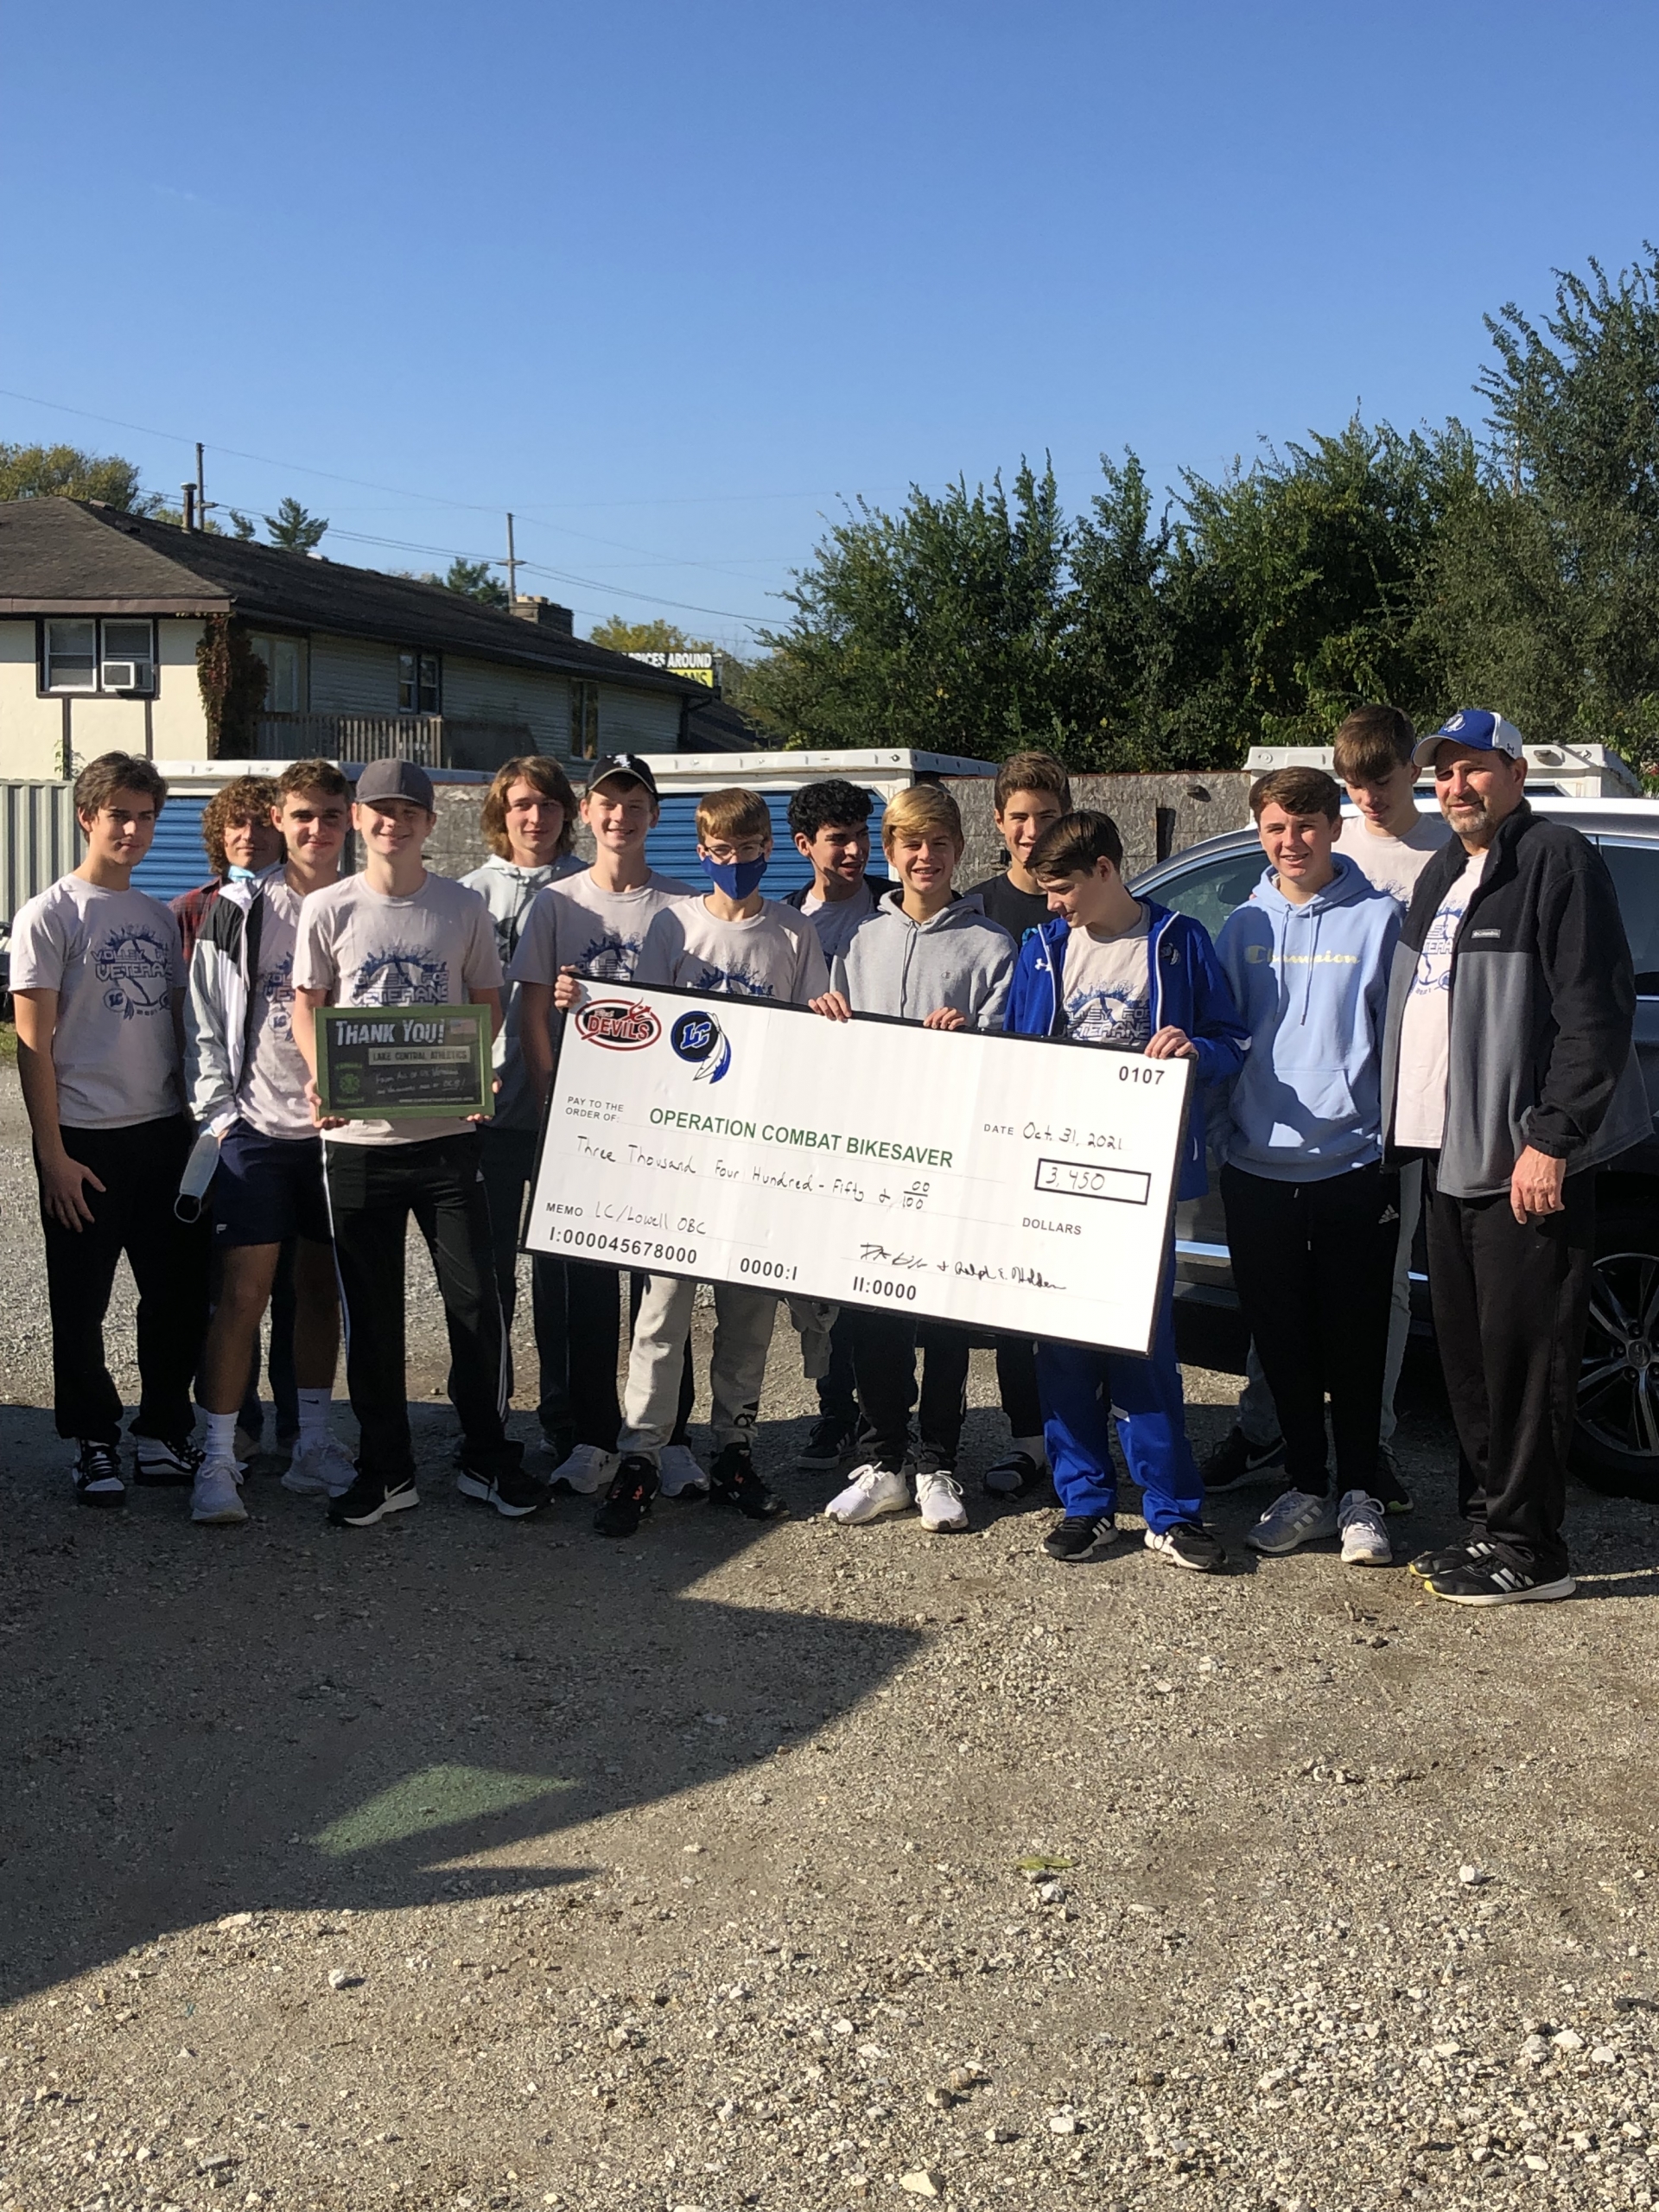 Coach Holden and the boys tennis team visited the Combat Bike Saver Garage on Saturday, October 30, 2021 to deliver the proceeds from their t-shirt fundraiser. Great job Boys Tennis!